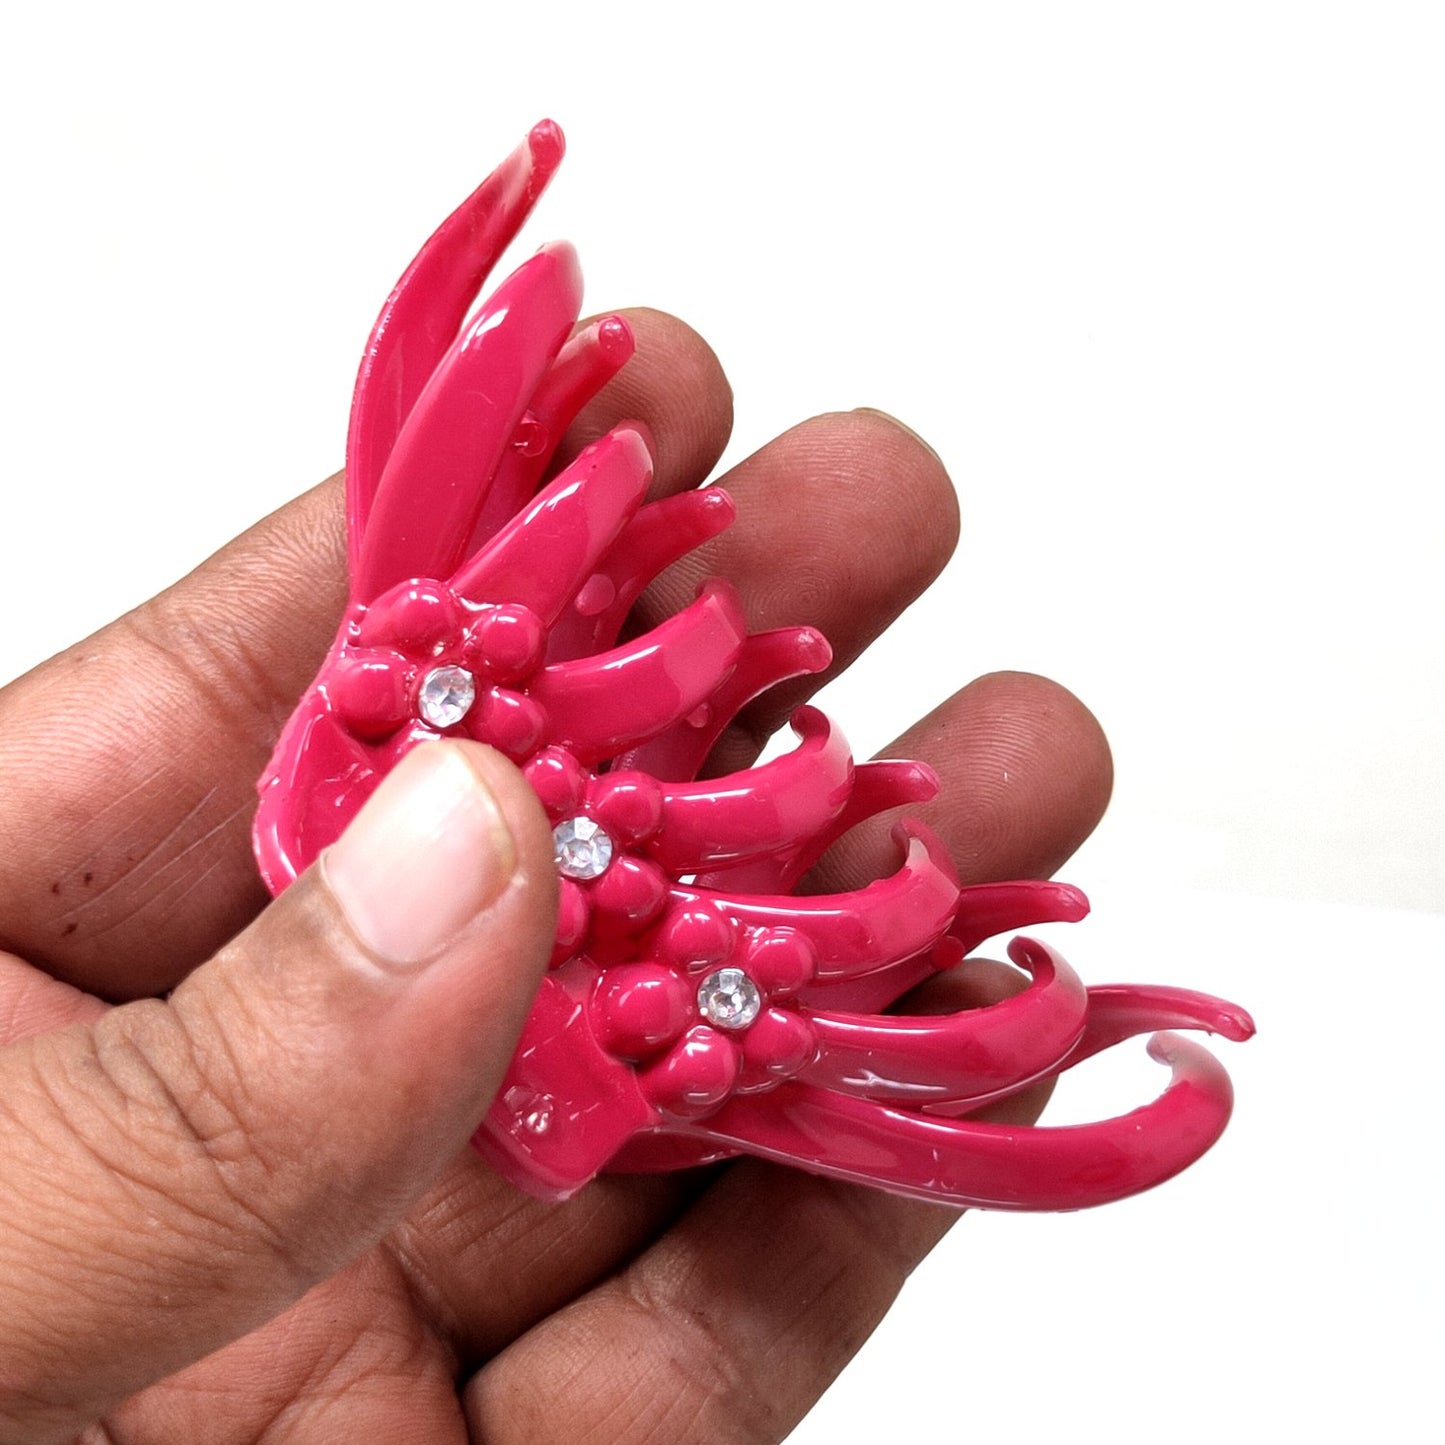 Rhinestone Studded Large Unbreakable Plastic Hair Clutcher for Girls and Women (Hot Pink, ZA-26D)